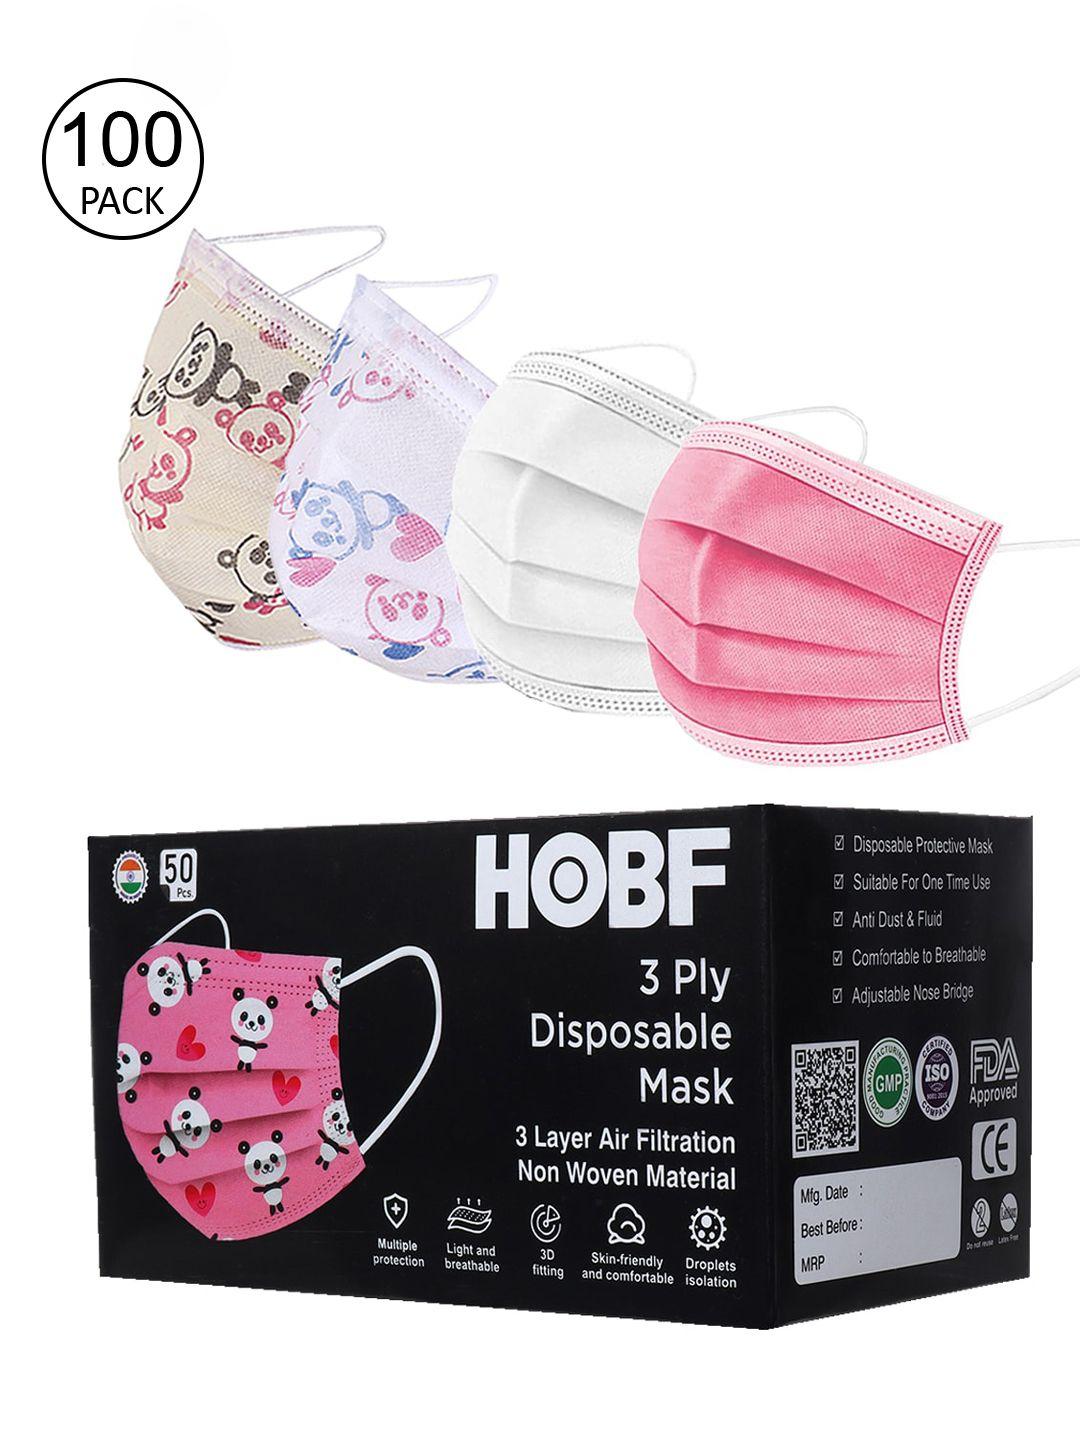 froggy white, pink & cream set of 100 anti-pollution masks